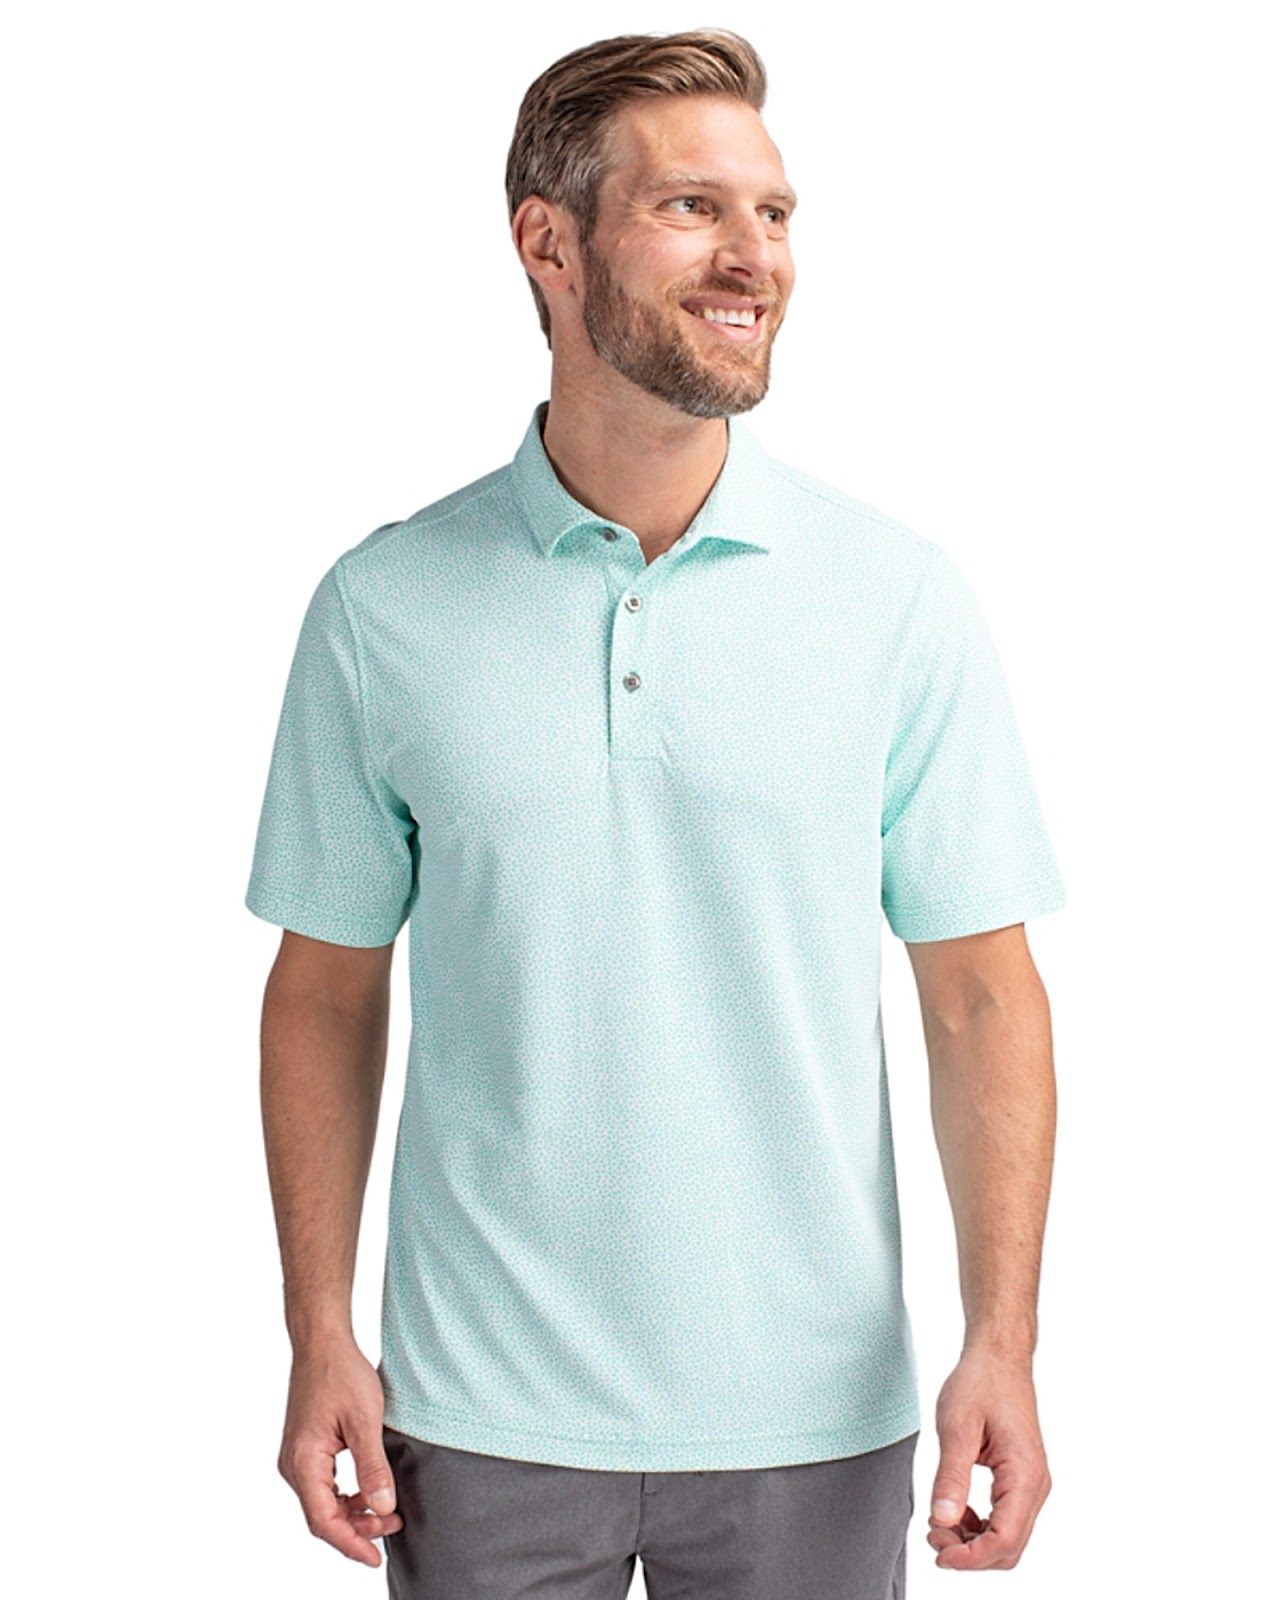 Cutter & Buck Virtue Eco Pique Botanical Green Print Recycled Mens Polo